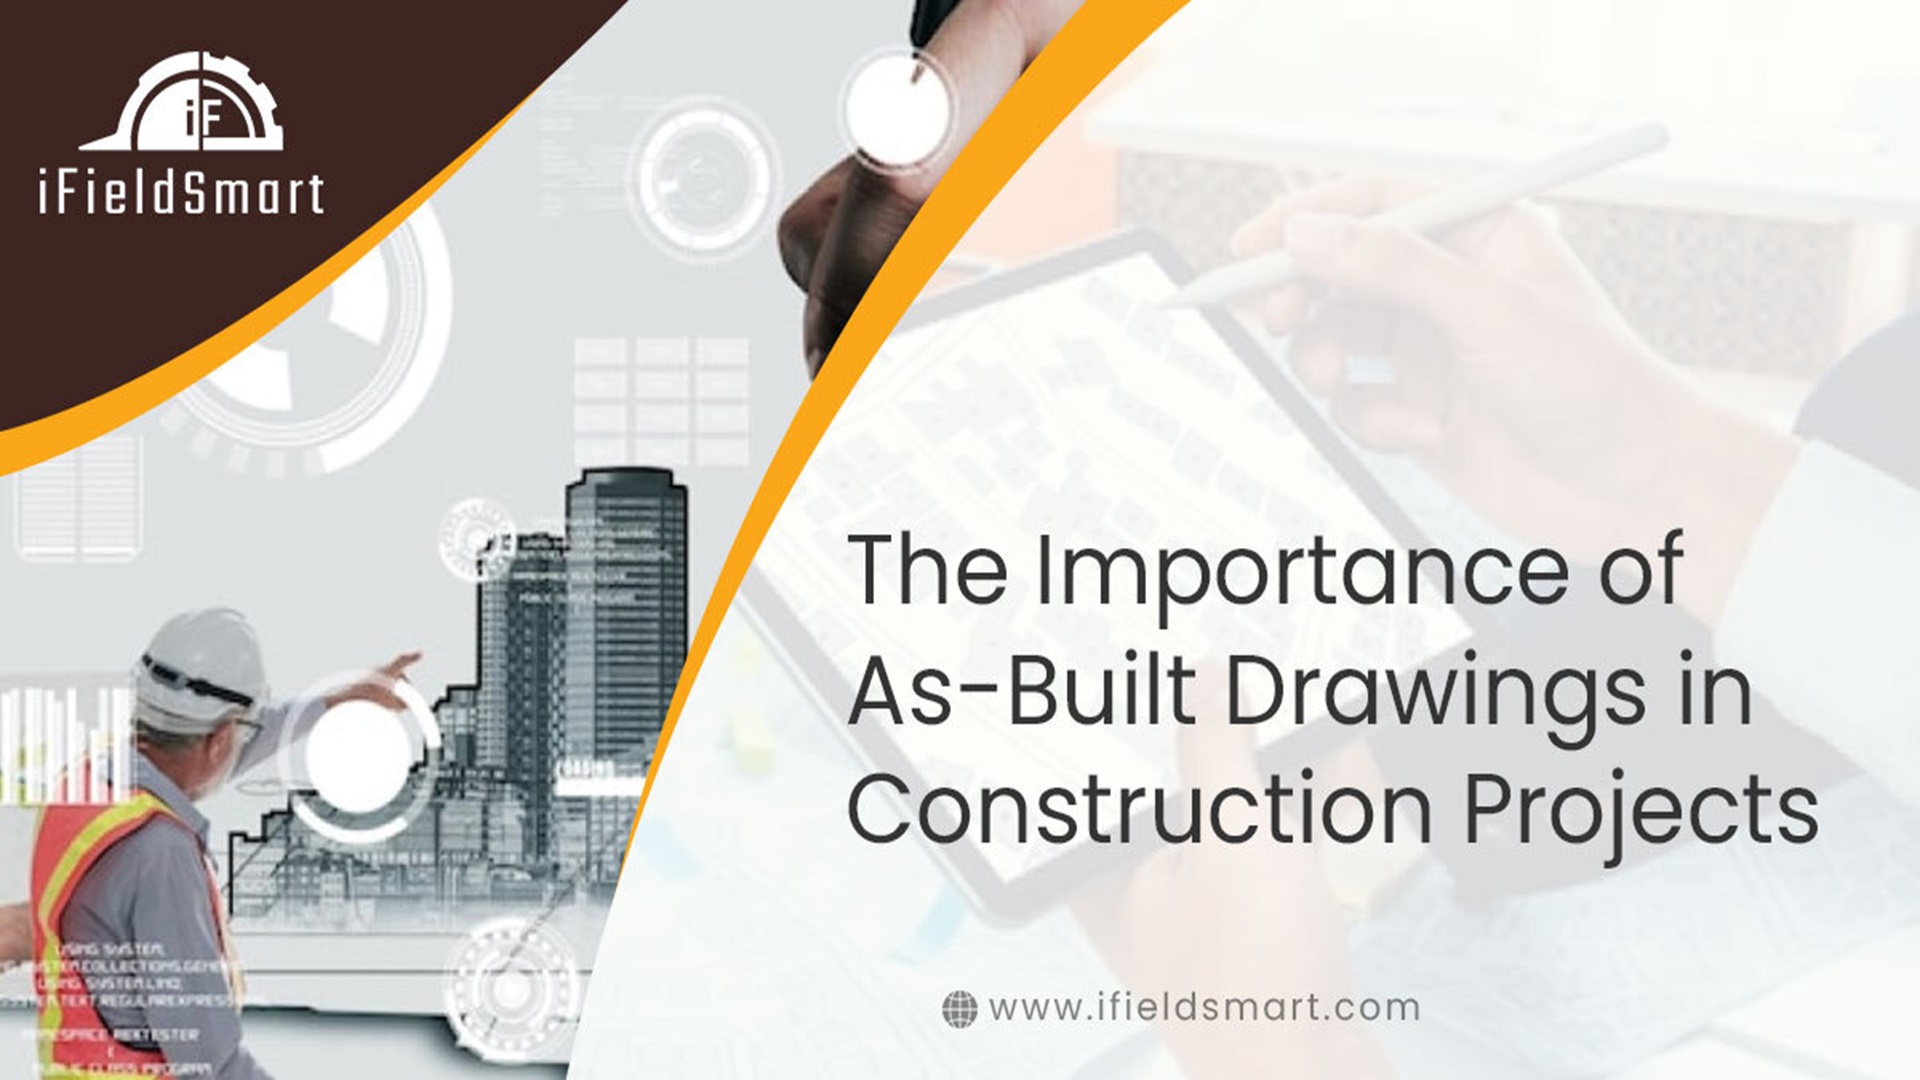 As-Built Drawings Software in Construction